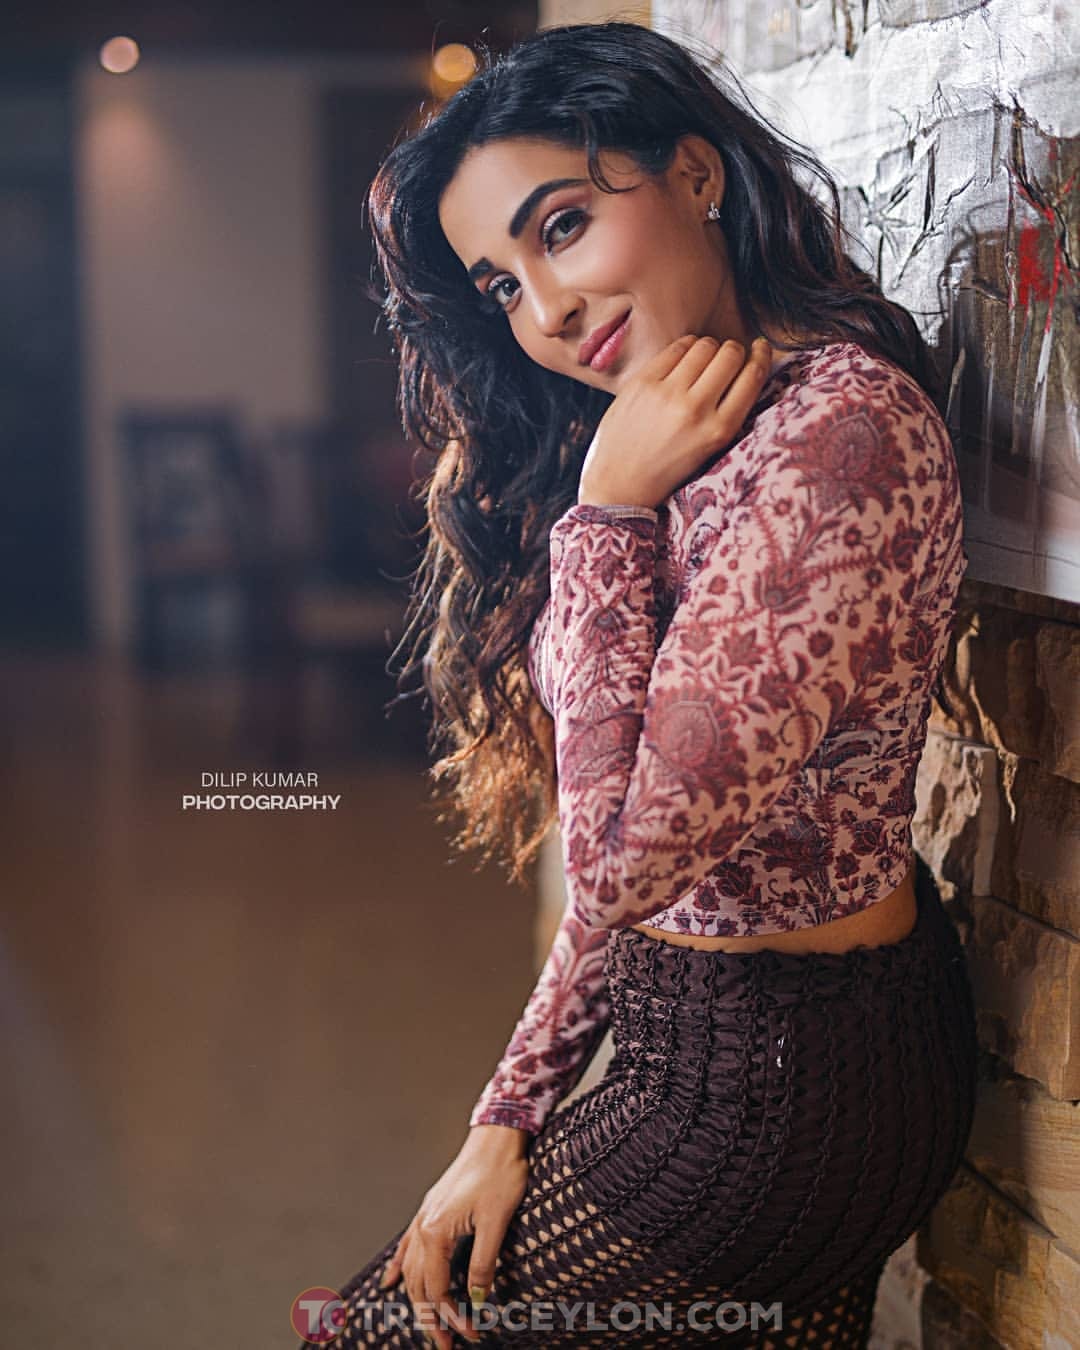 Stunning Looks of South Indian Actress Pretty Parvati Nair